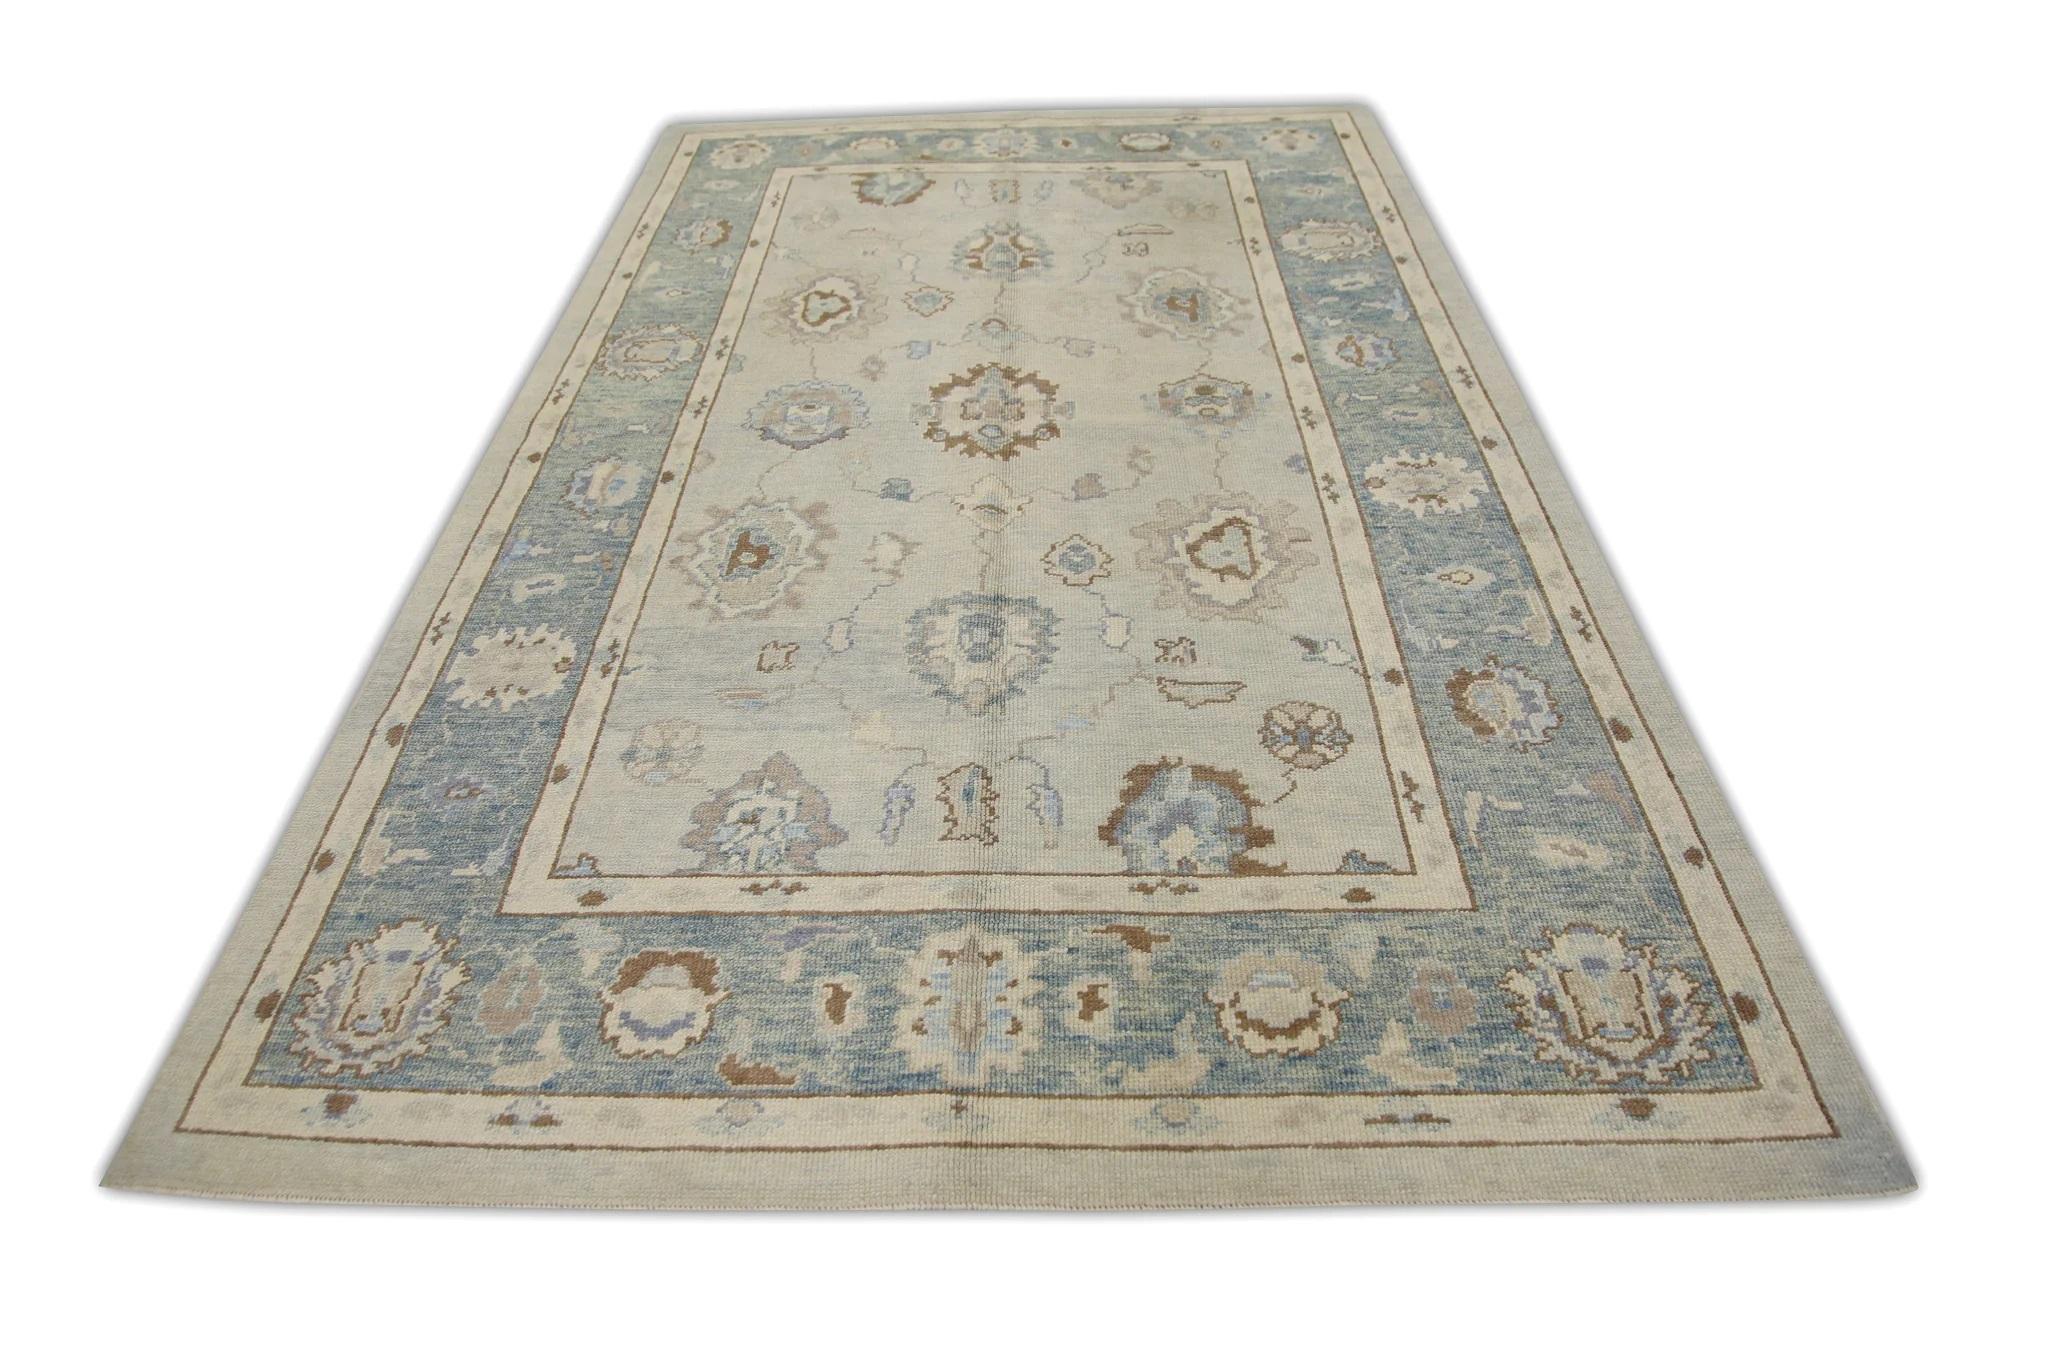 Contemporary Blue and Brown Handwoven Wool Turkish Oushak Rug in Floral Pattern 6' x 9'1